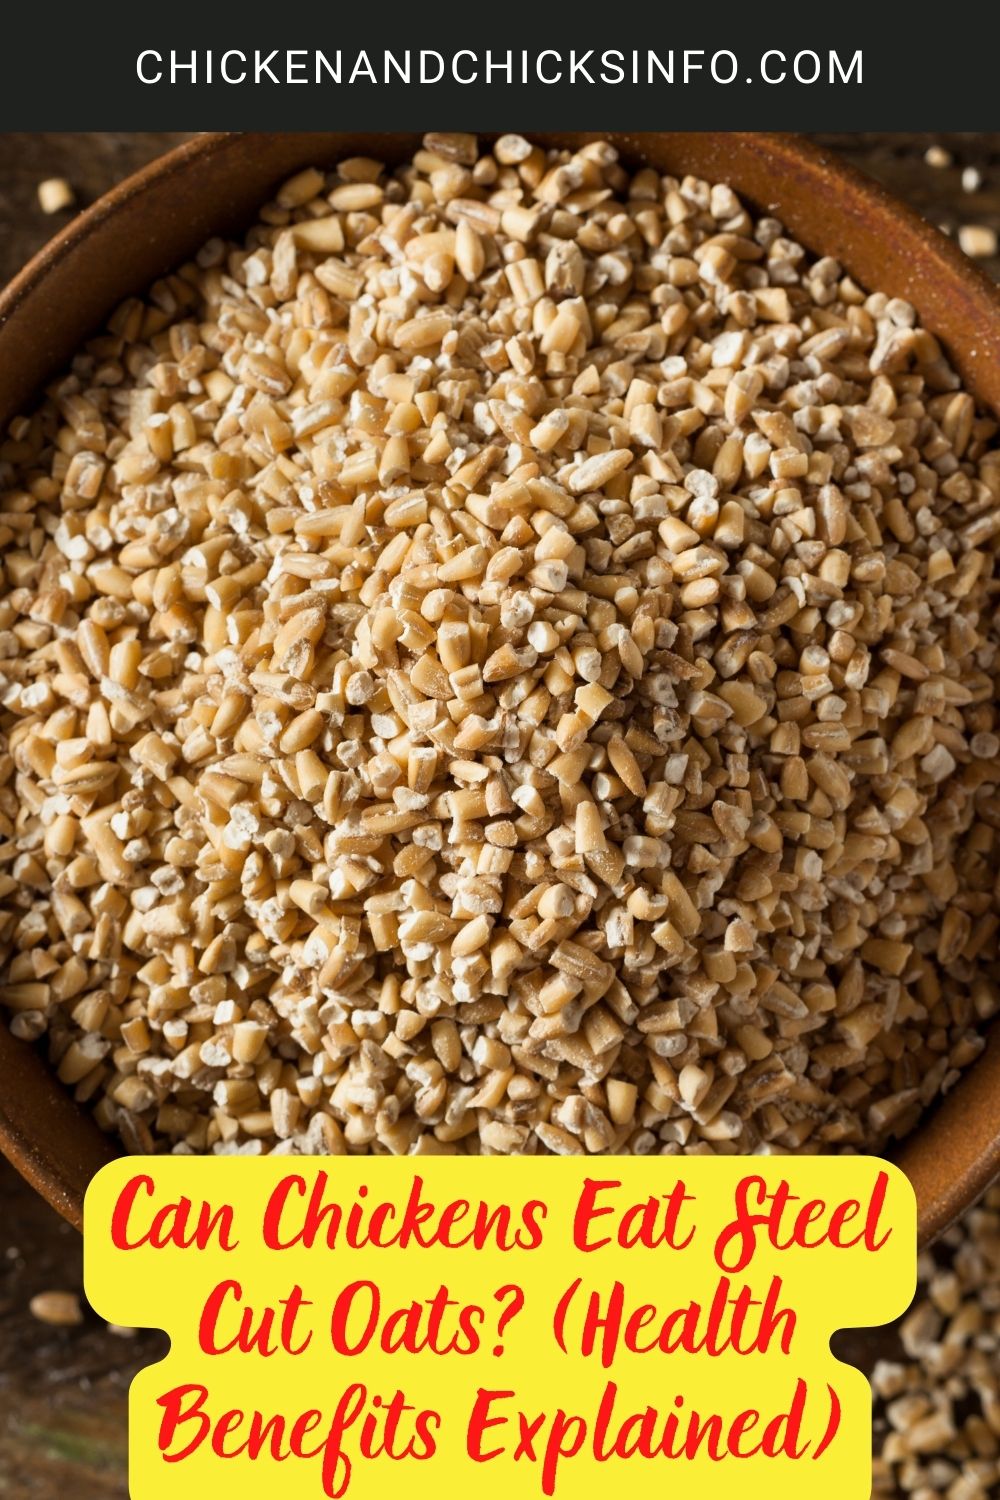 Can Chickens Eat Steel Cut Oats? (Health Benefits Explained) poster.
